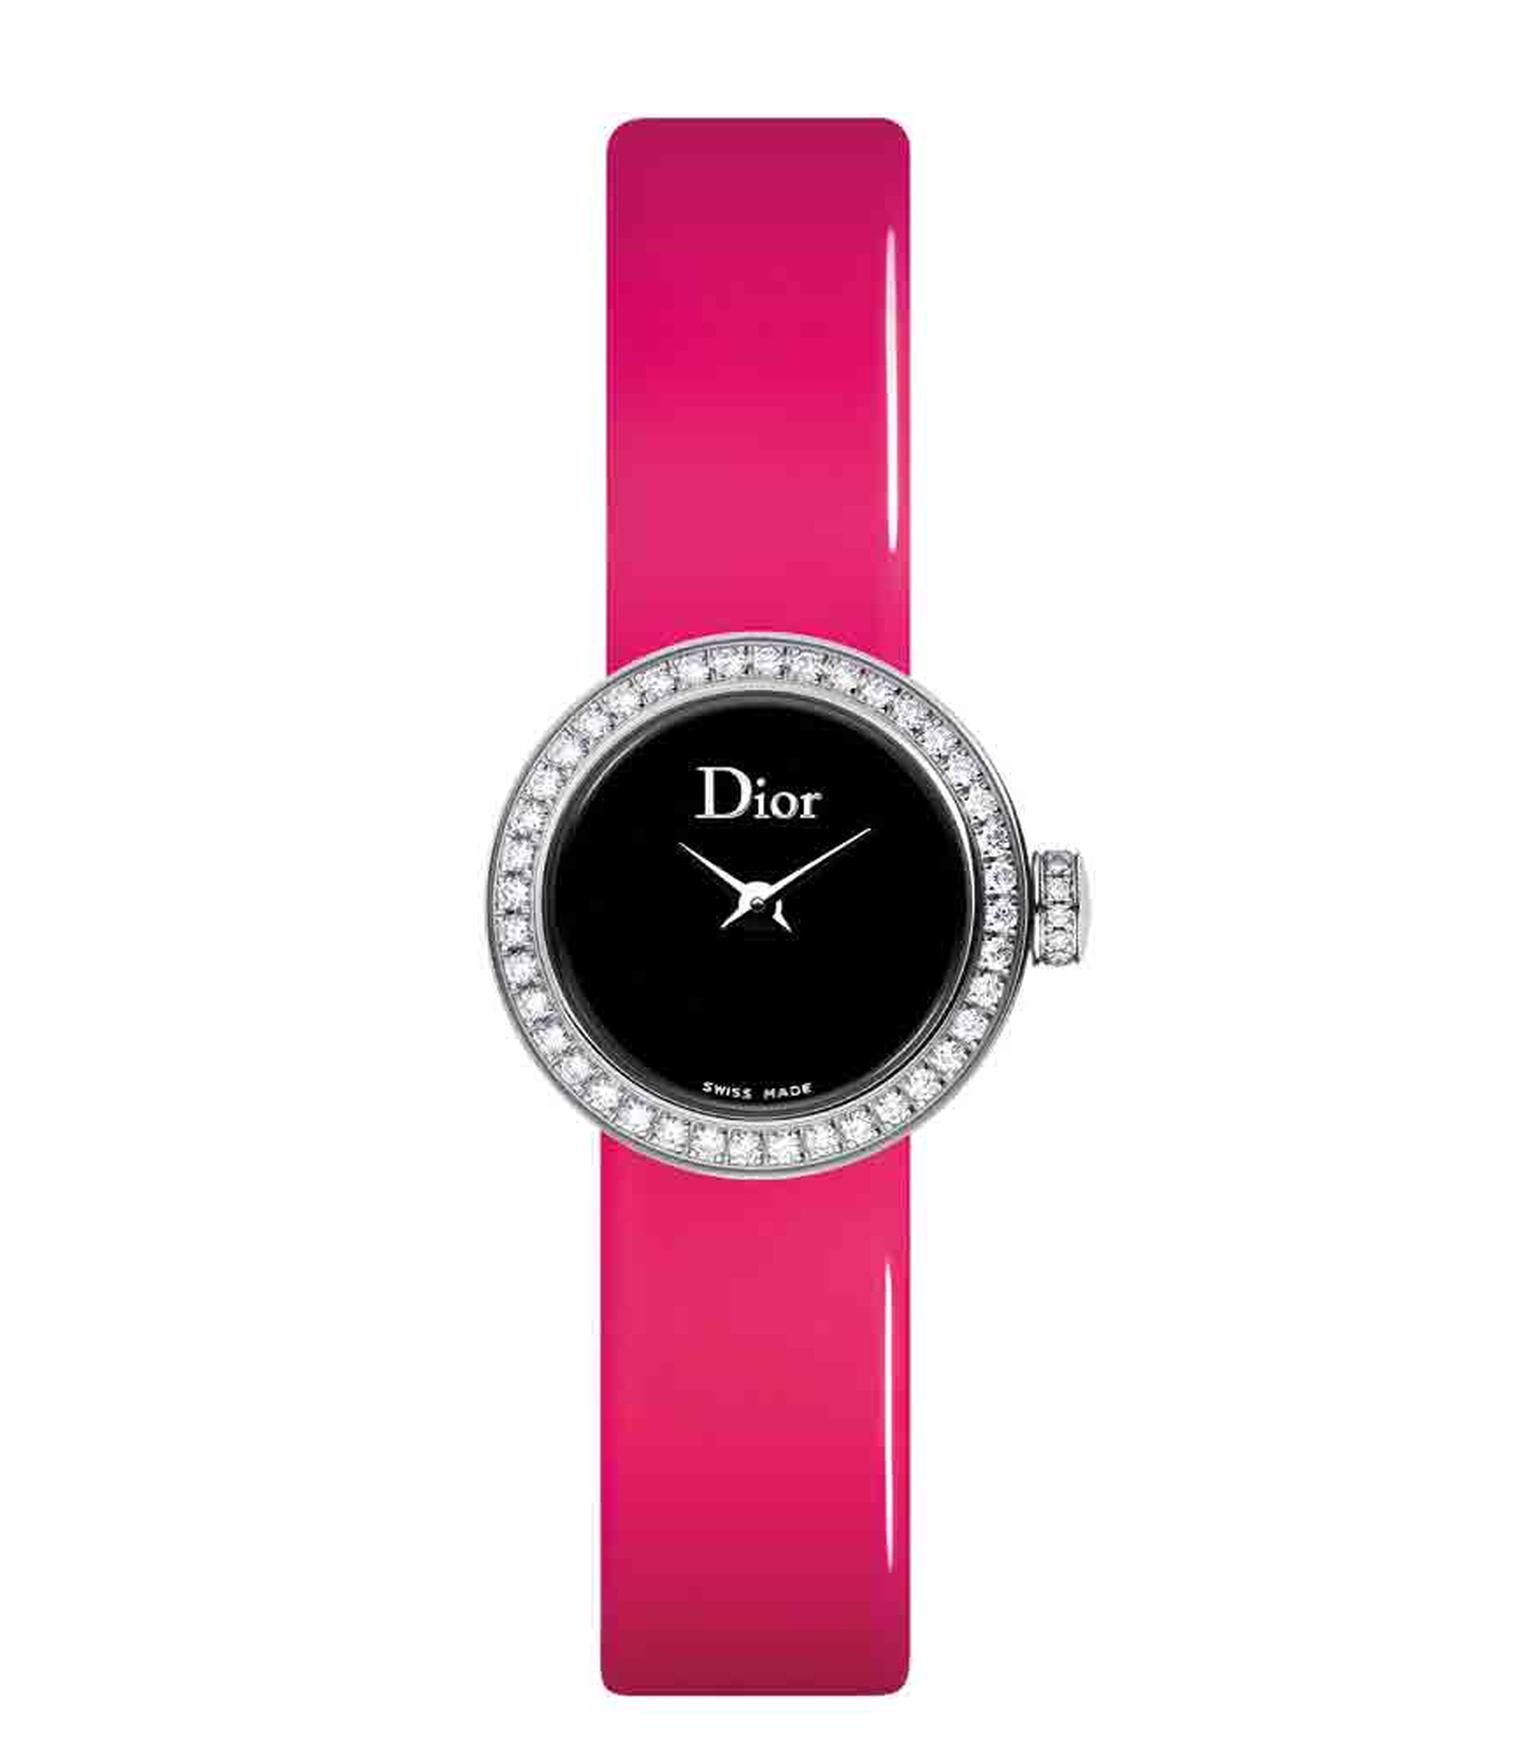 La Mini D de Dior (19mm) with neon strap, steel case, diamond-set bezel and black mother-of-pearl dial by Dior (£2,900).